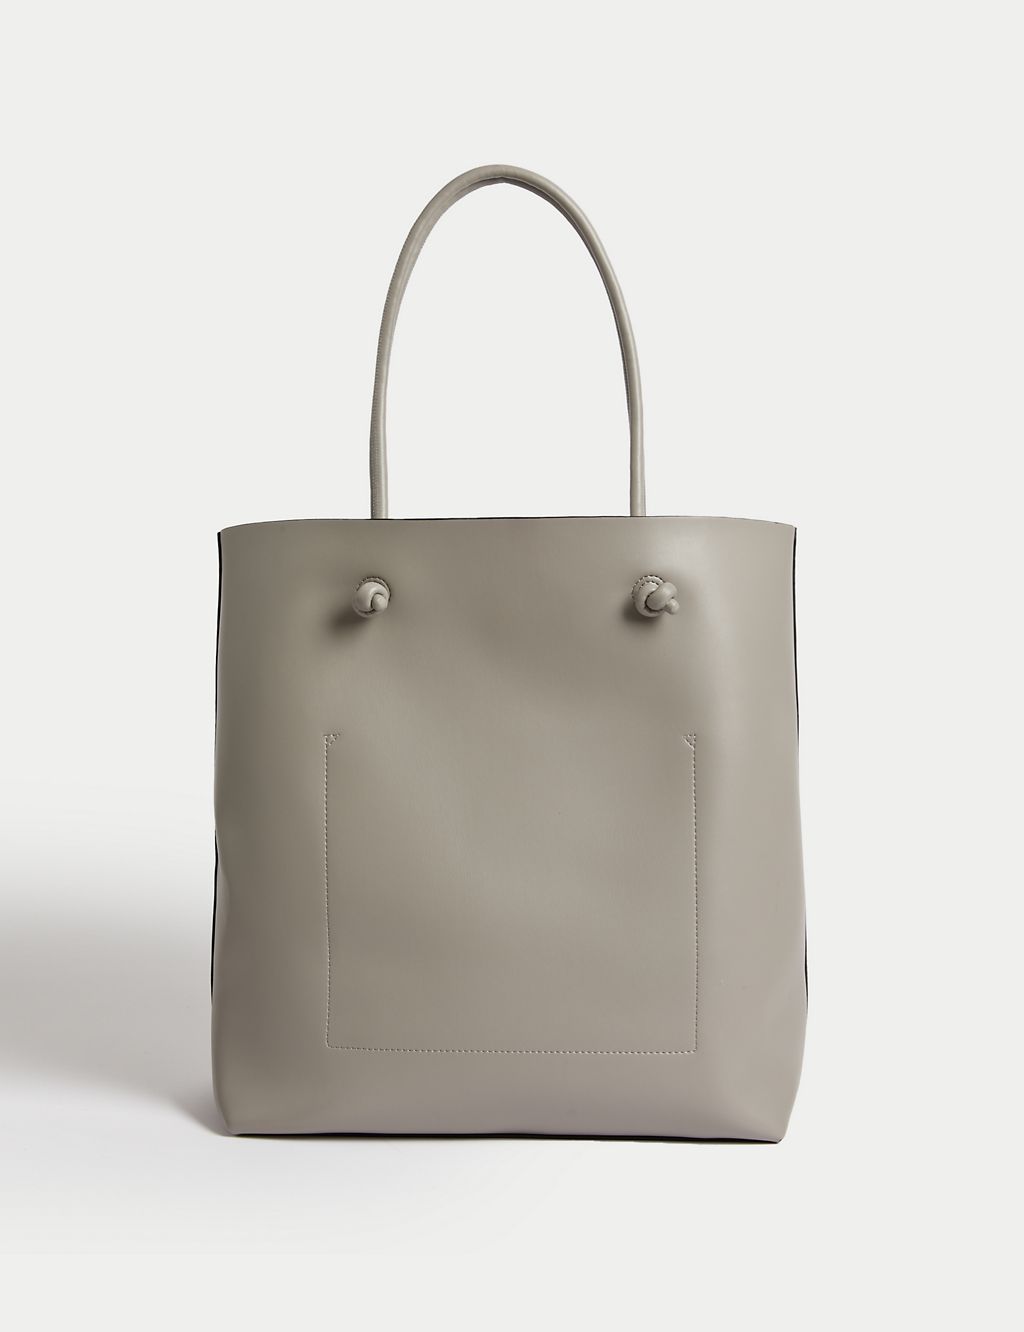 M&S Sequence + Faux Leather-based mostly Tote Glean